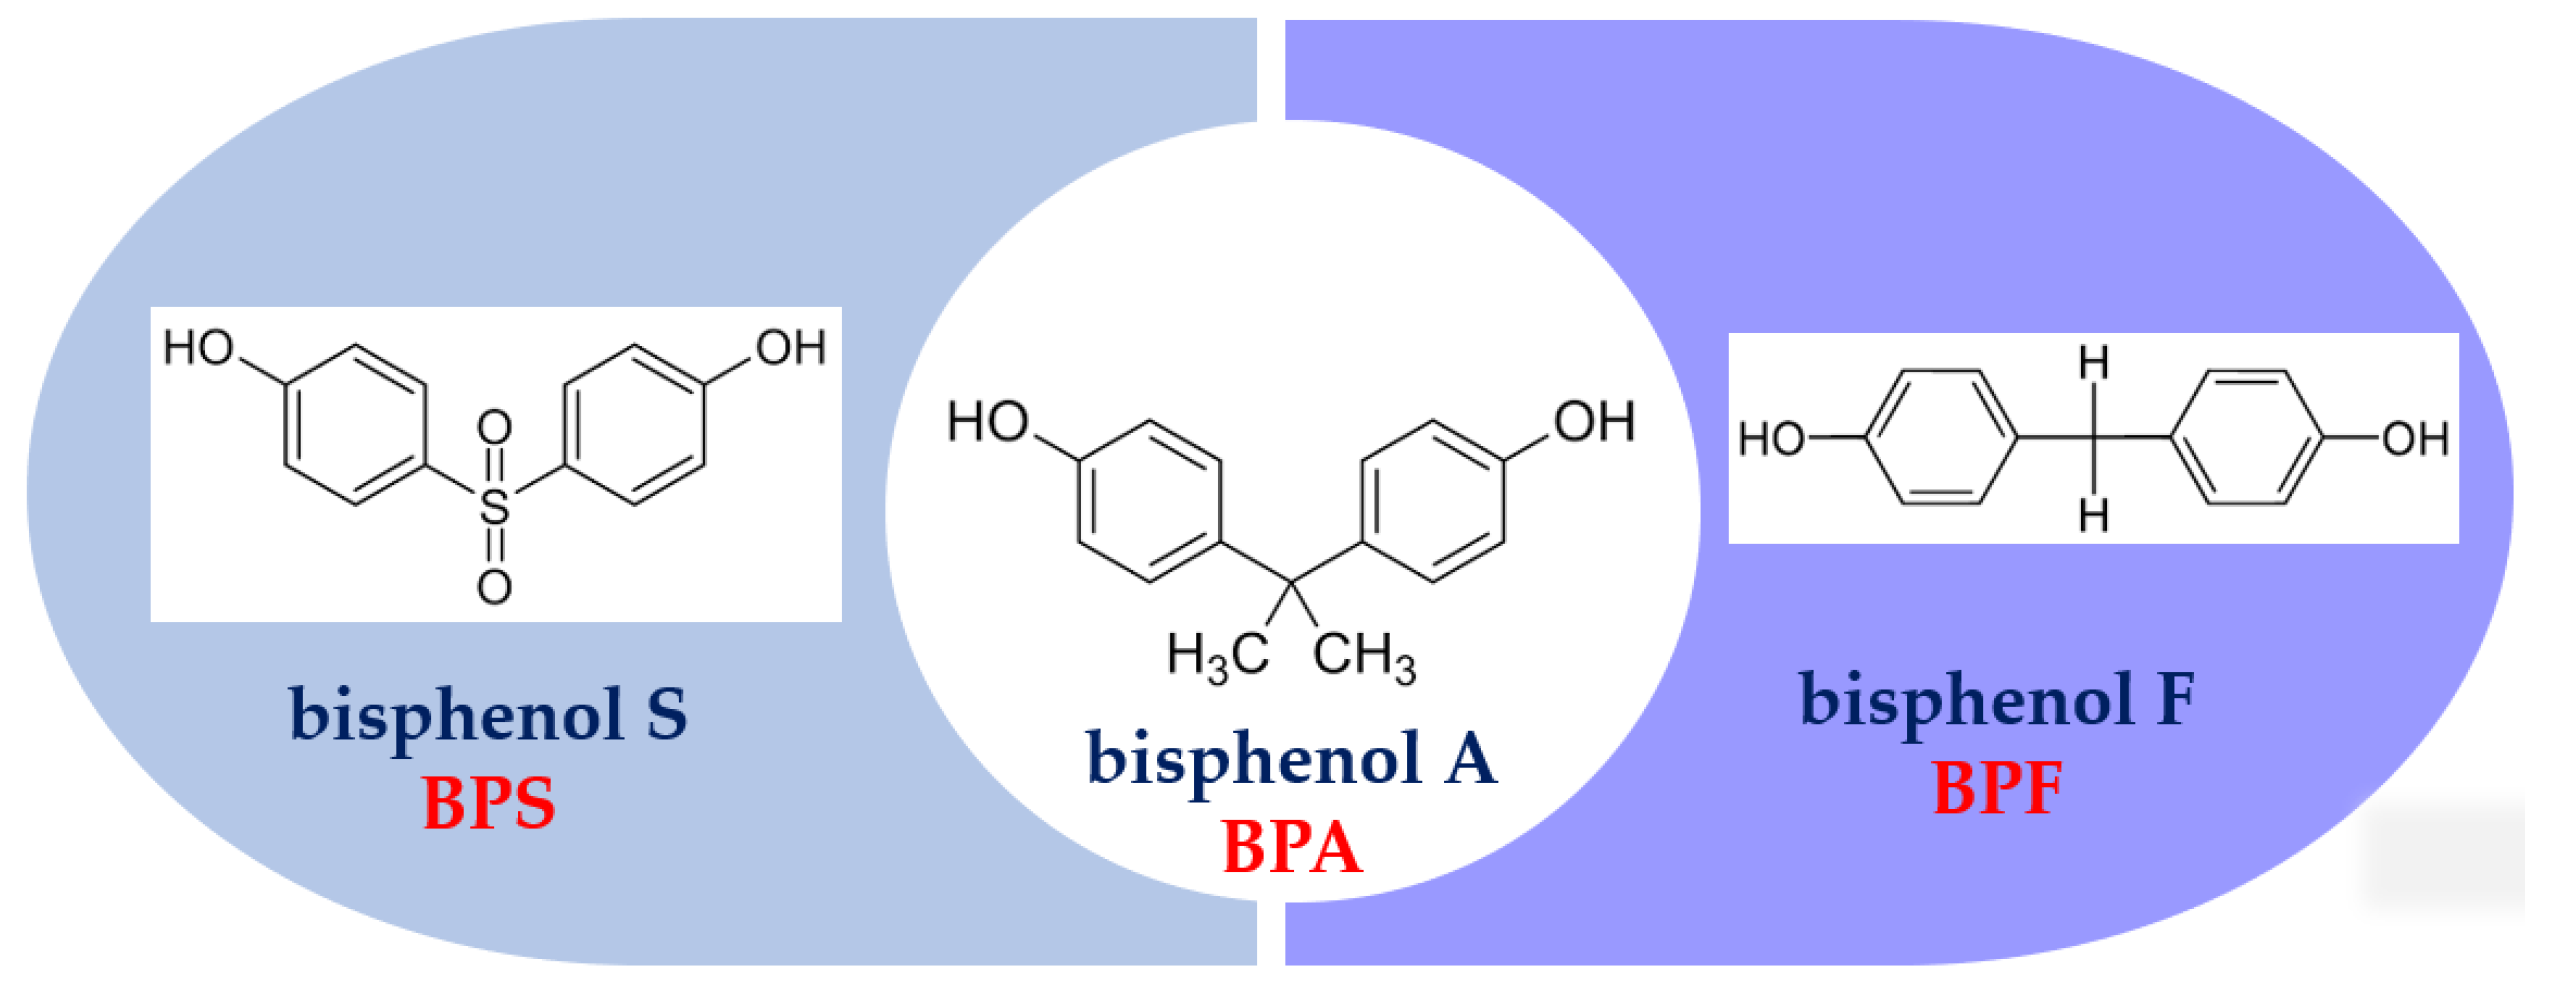 Bisphenol A - Chemicals In Our Life - ECHA